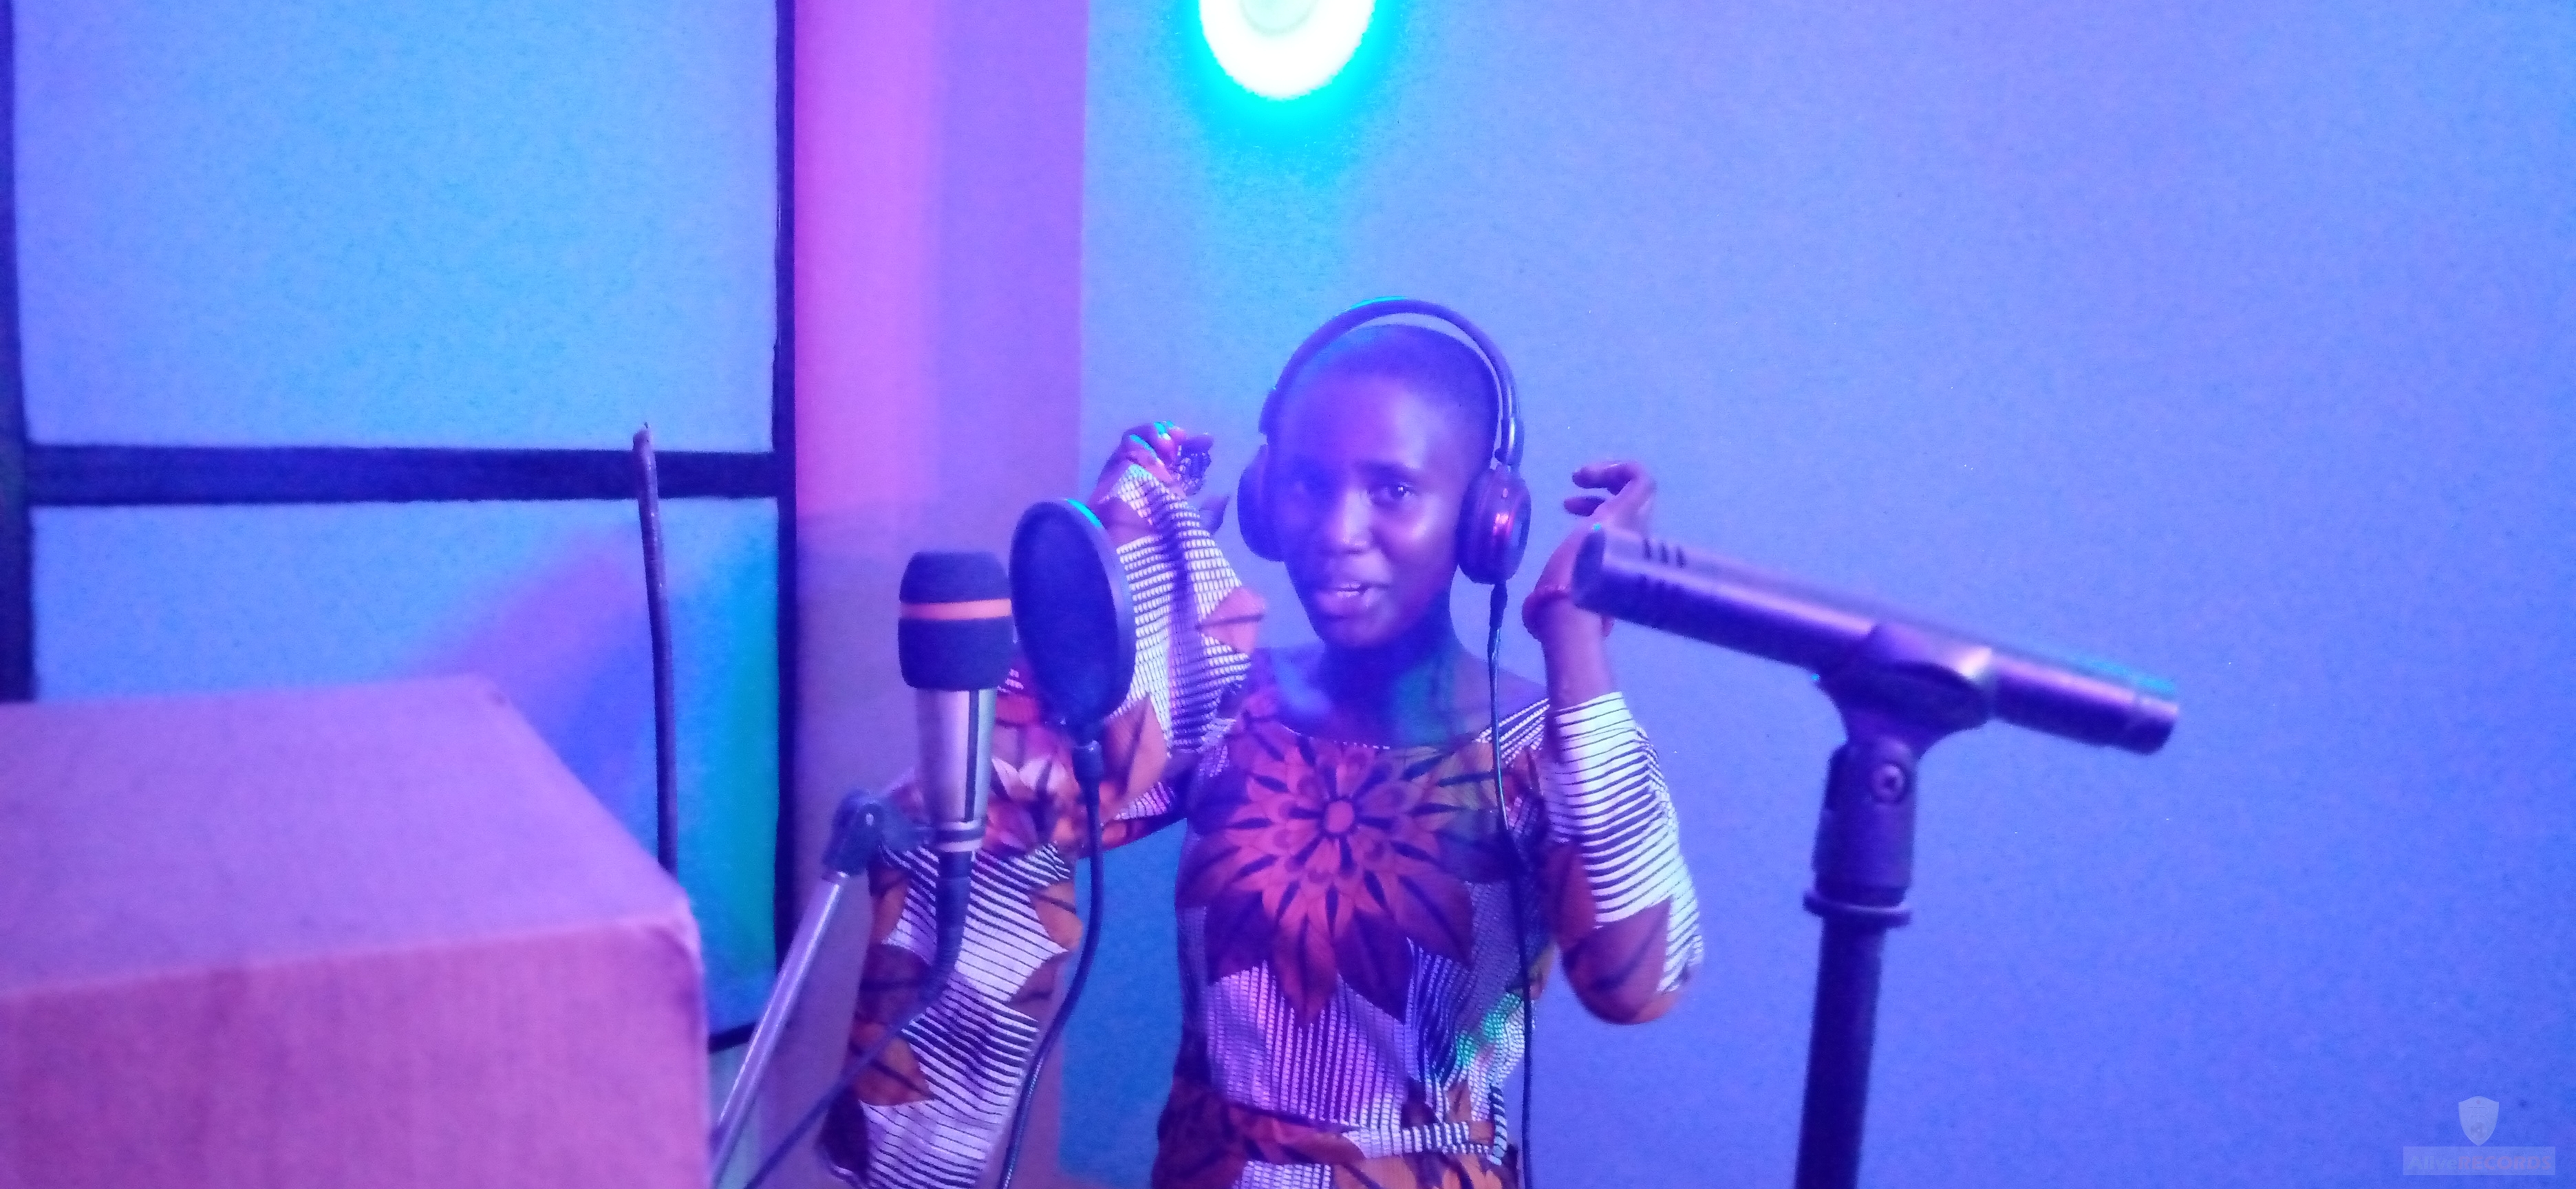 Joy backing up on the song secret place by Alive Kelvin. She is amazing